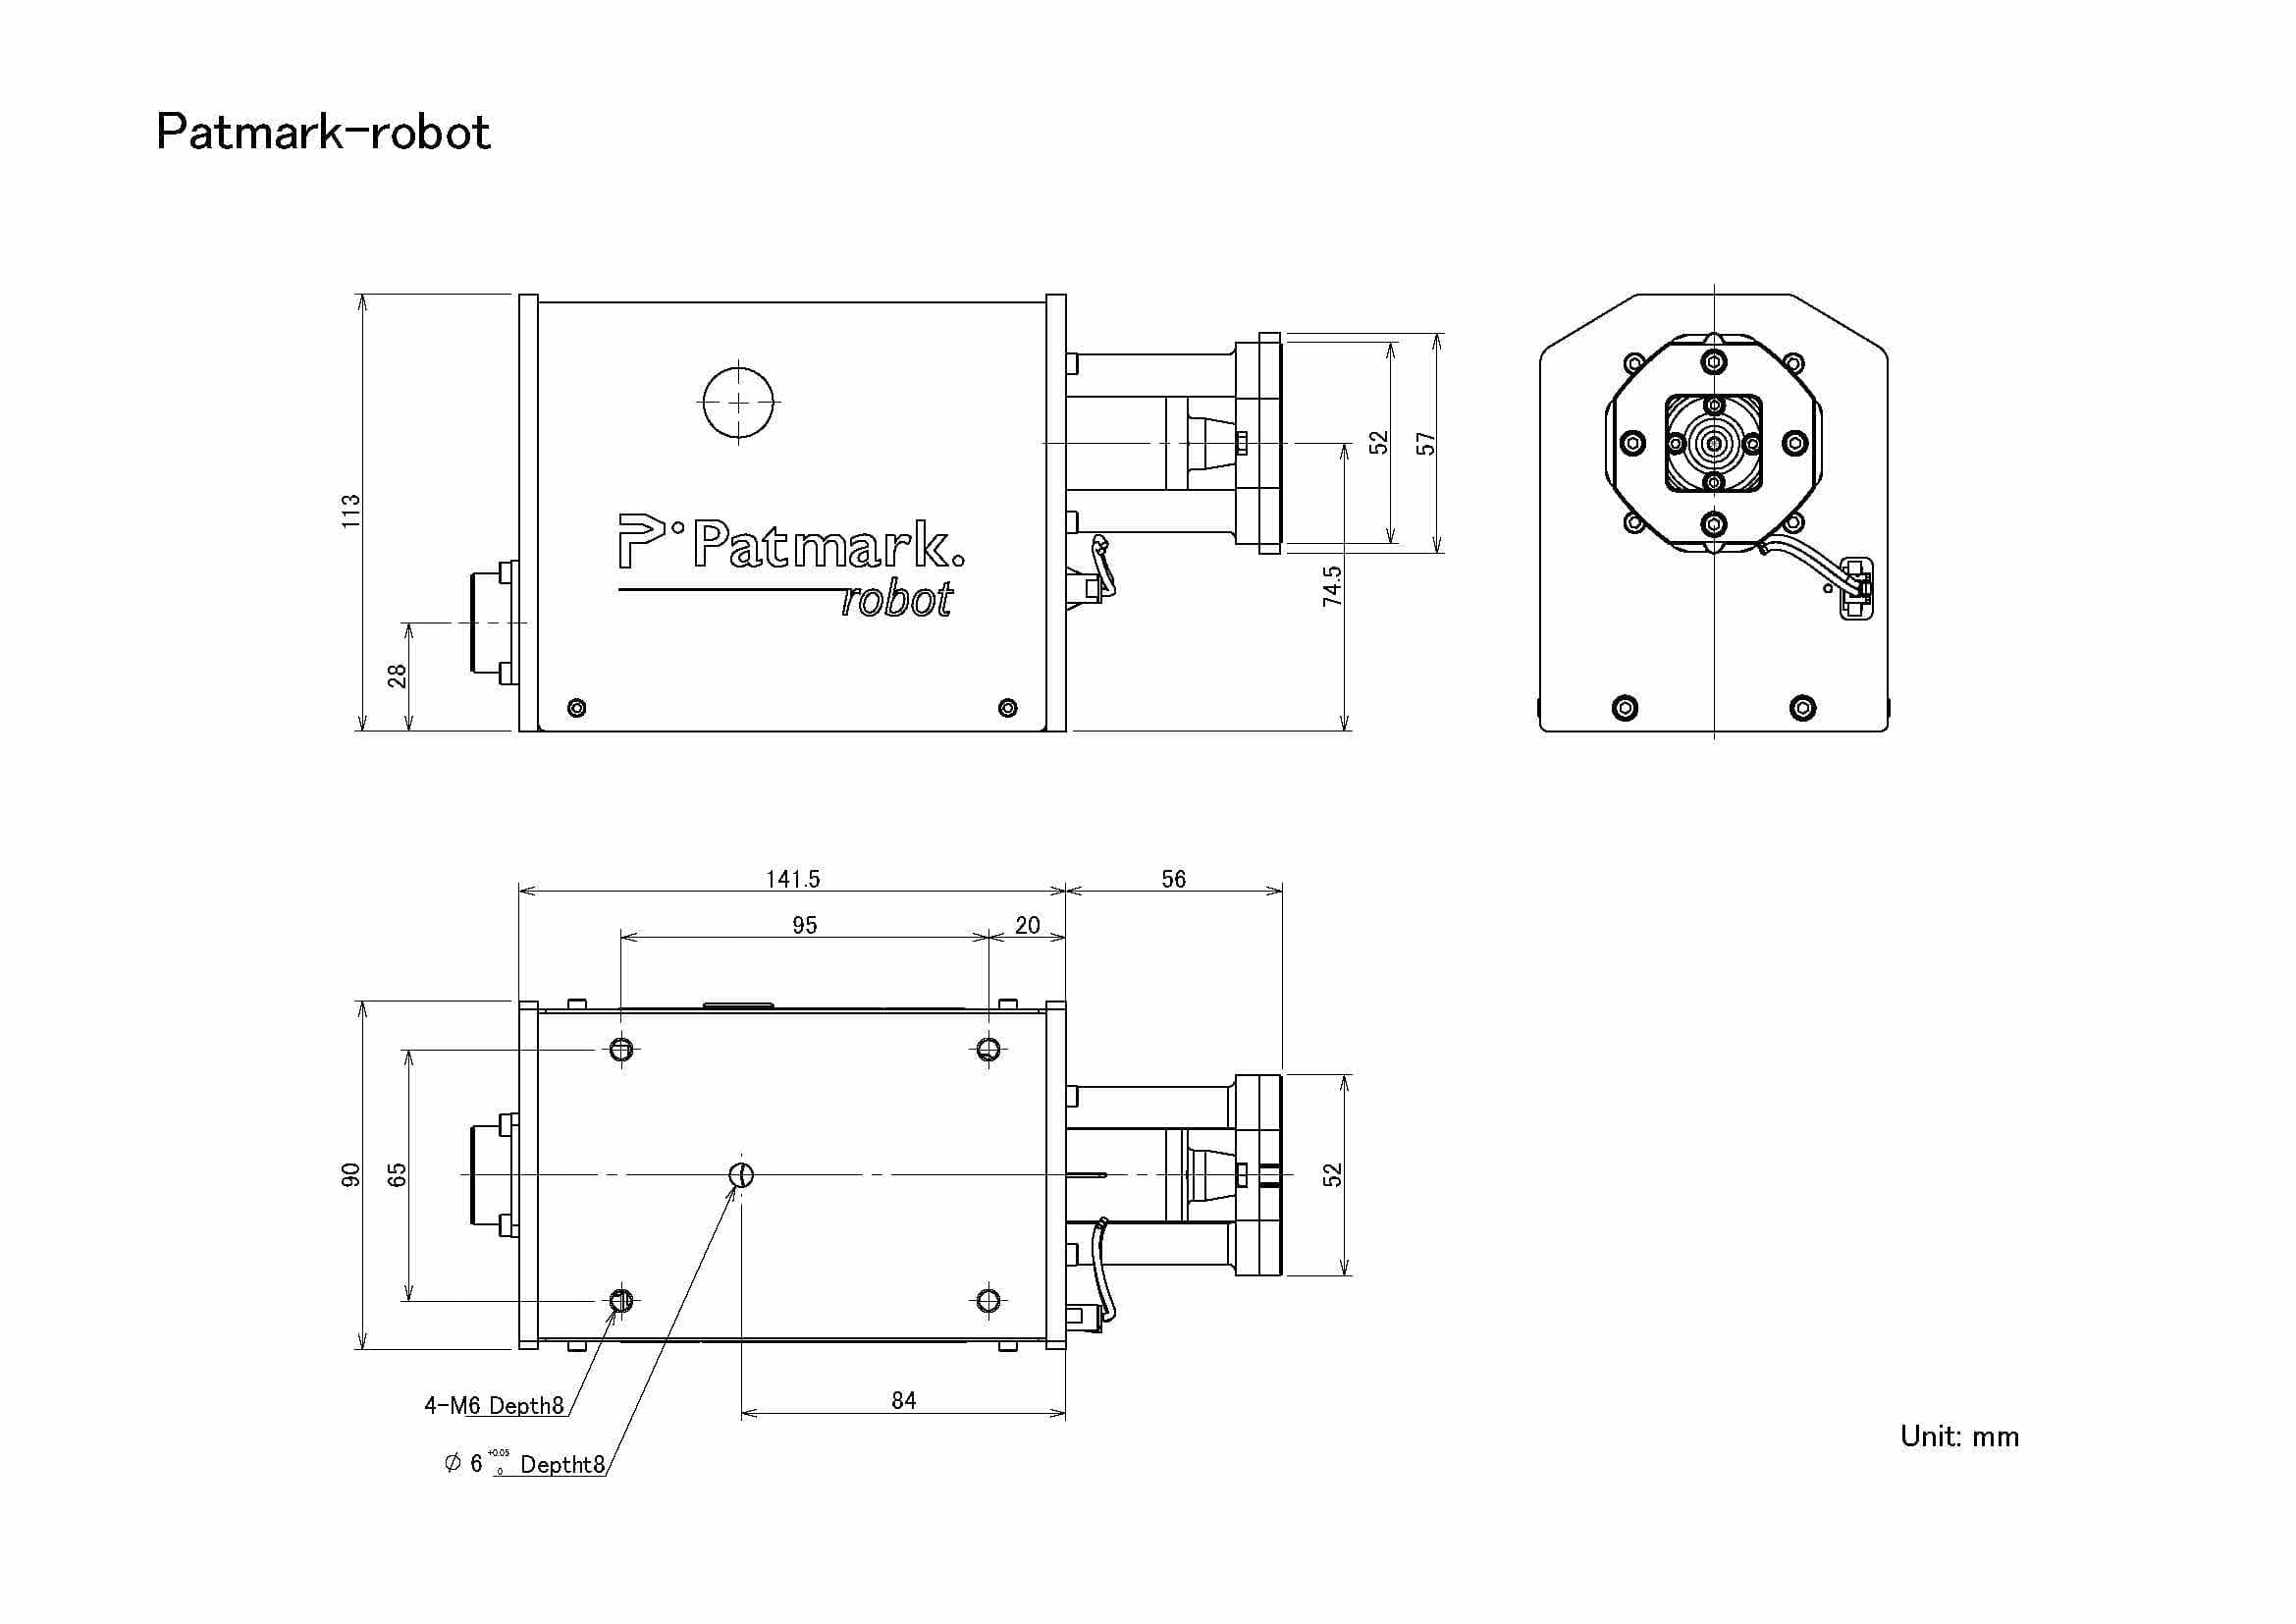 A dimensional drawing of the connection between the side with the engraving 'P Patmark robot' on the main body of the Patmark robot and the robot arm.